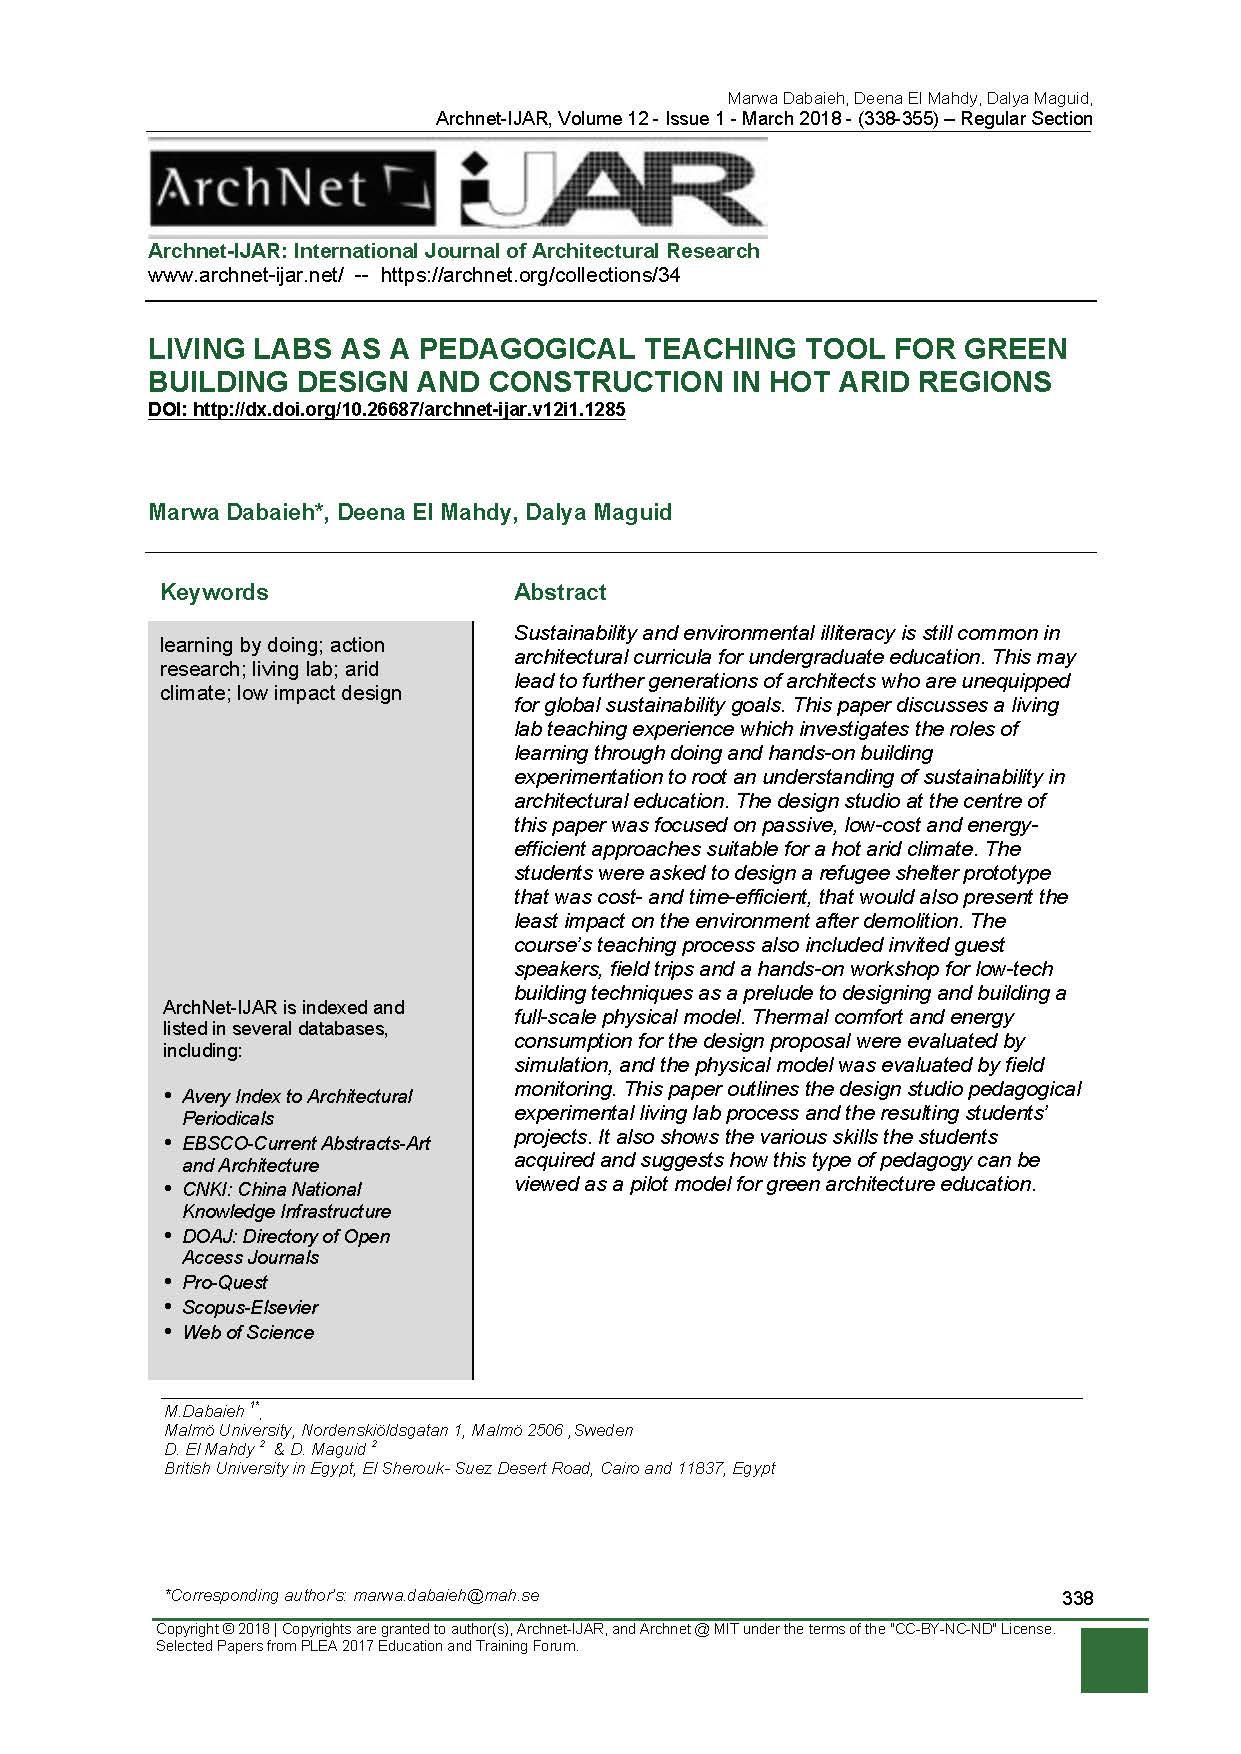 Living Labs as a Pedagogical Teaching Tool for Green Building Design and Construction in Hot Arid Regions